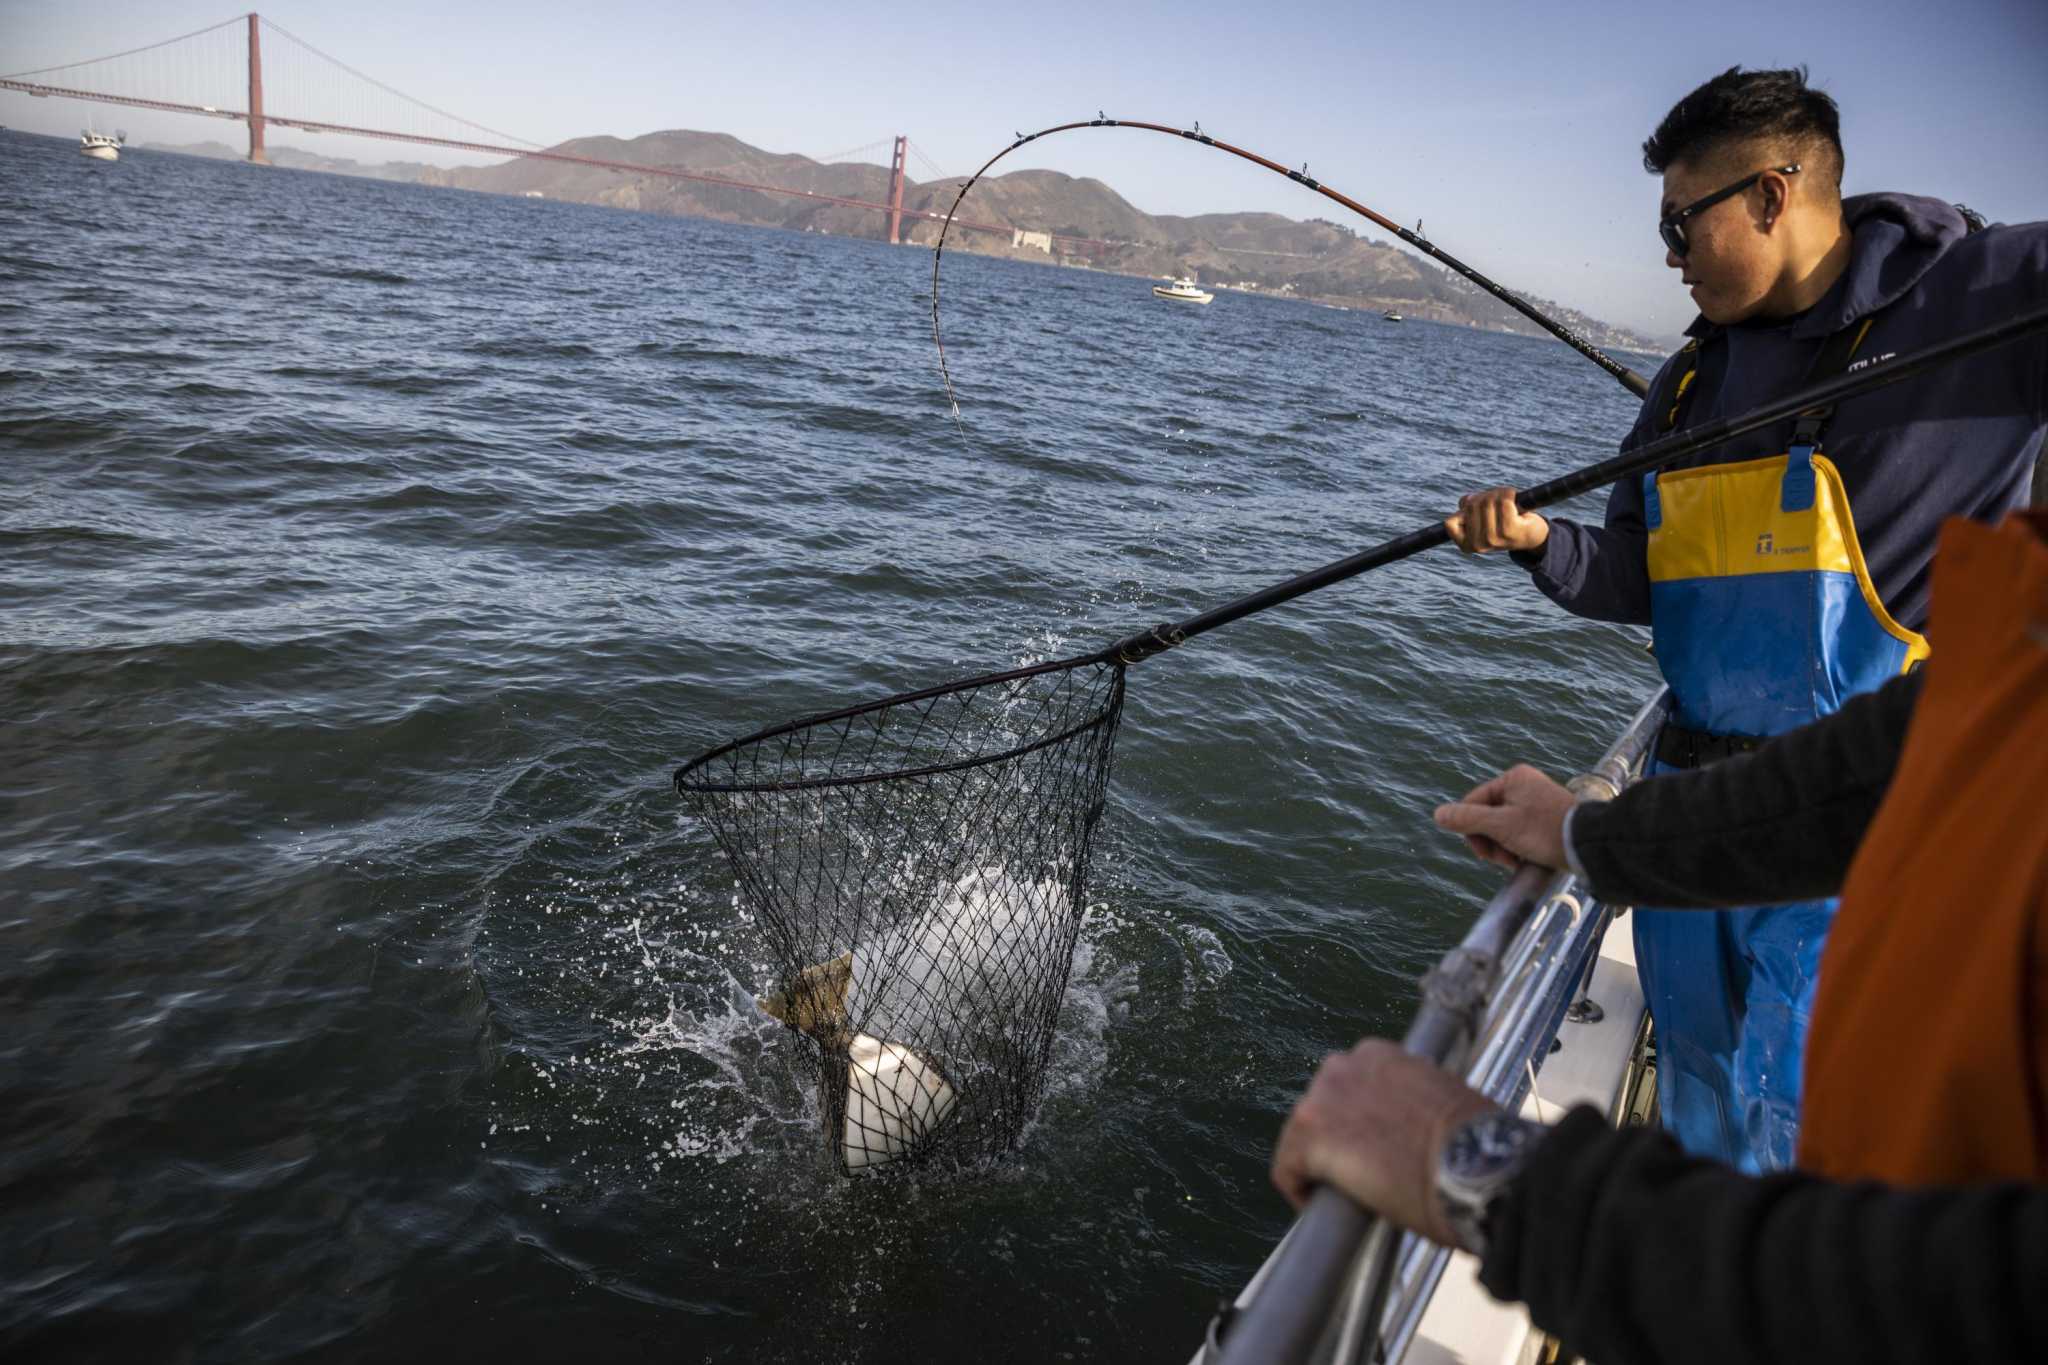 Halibut fishing is having moment in San Francisco Bay right now